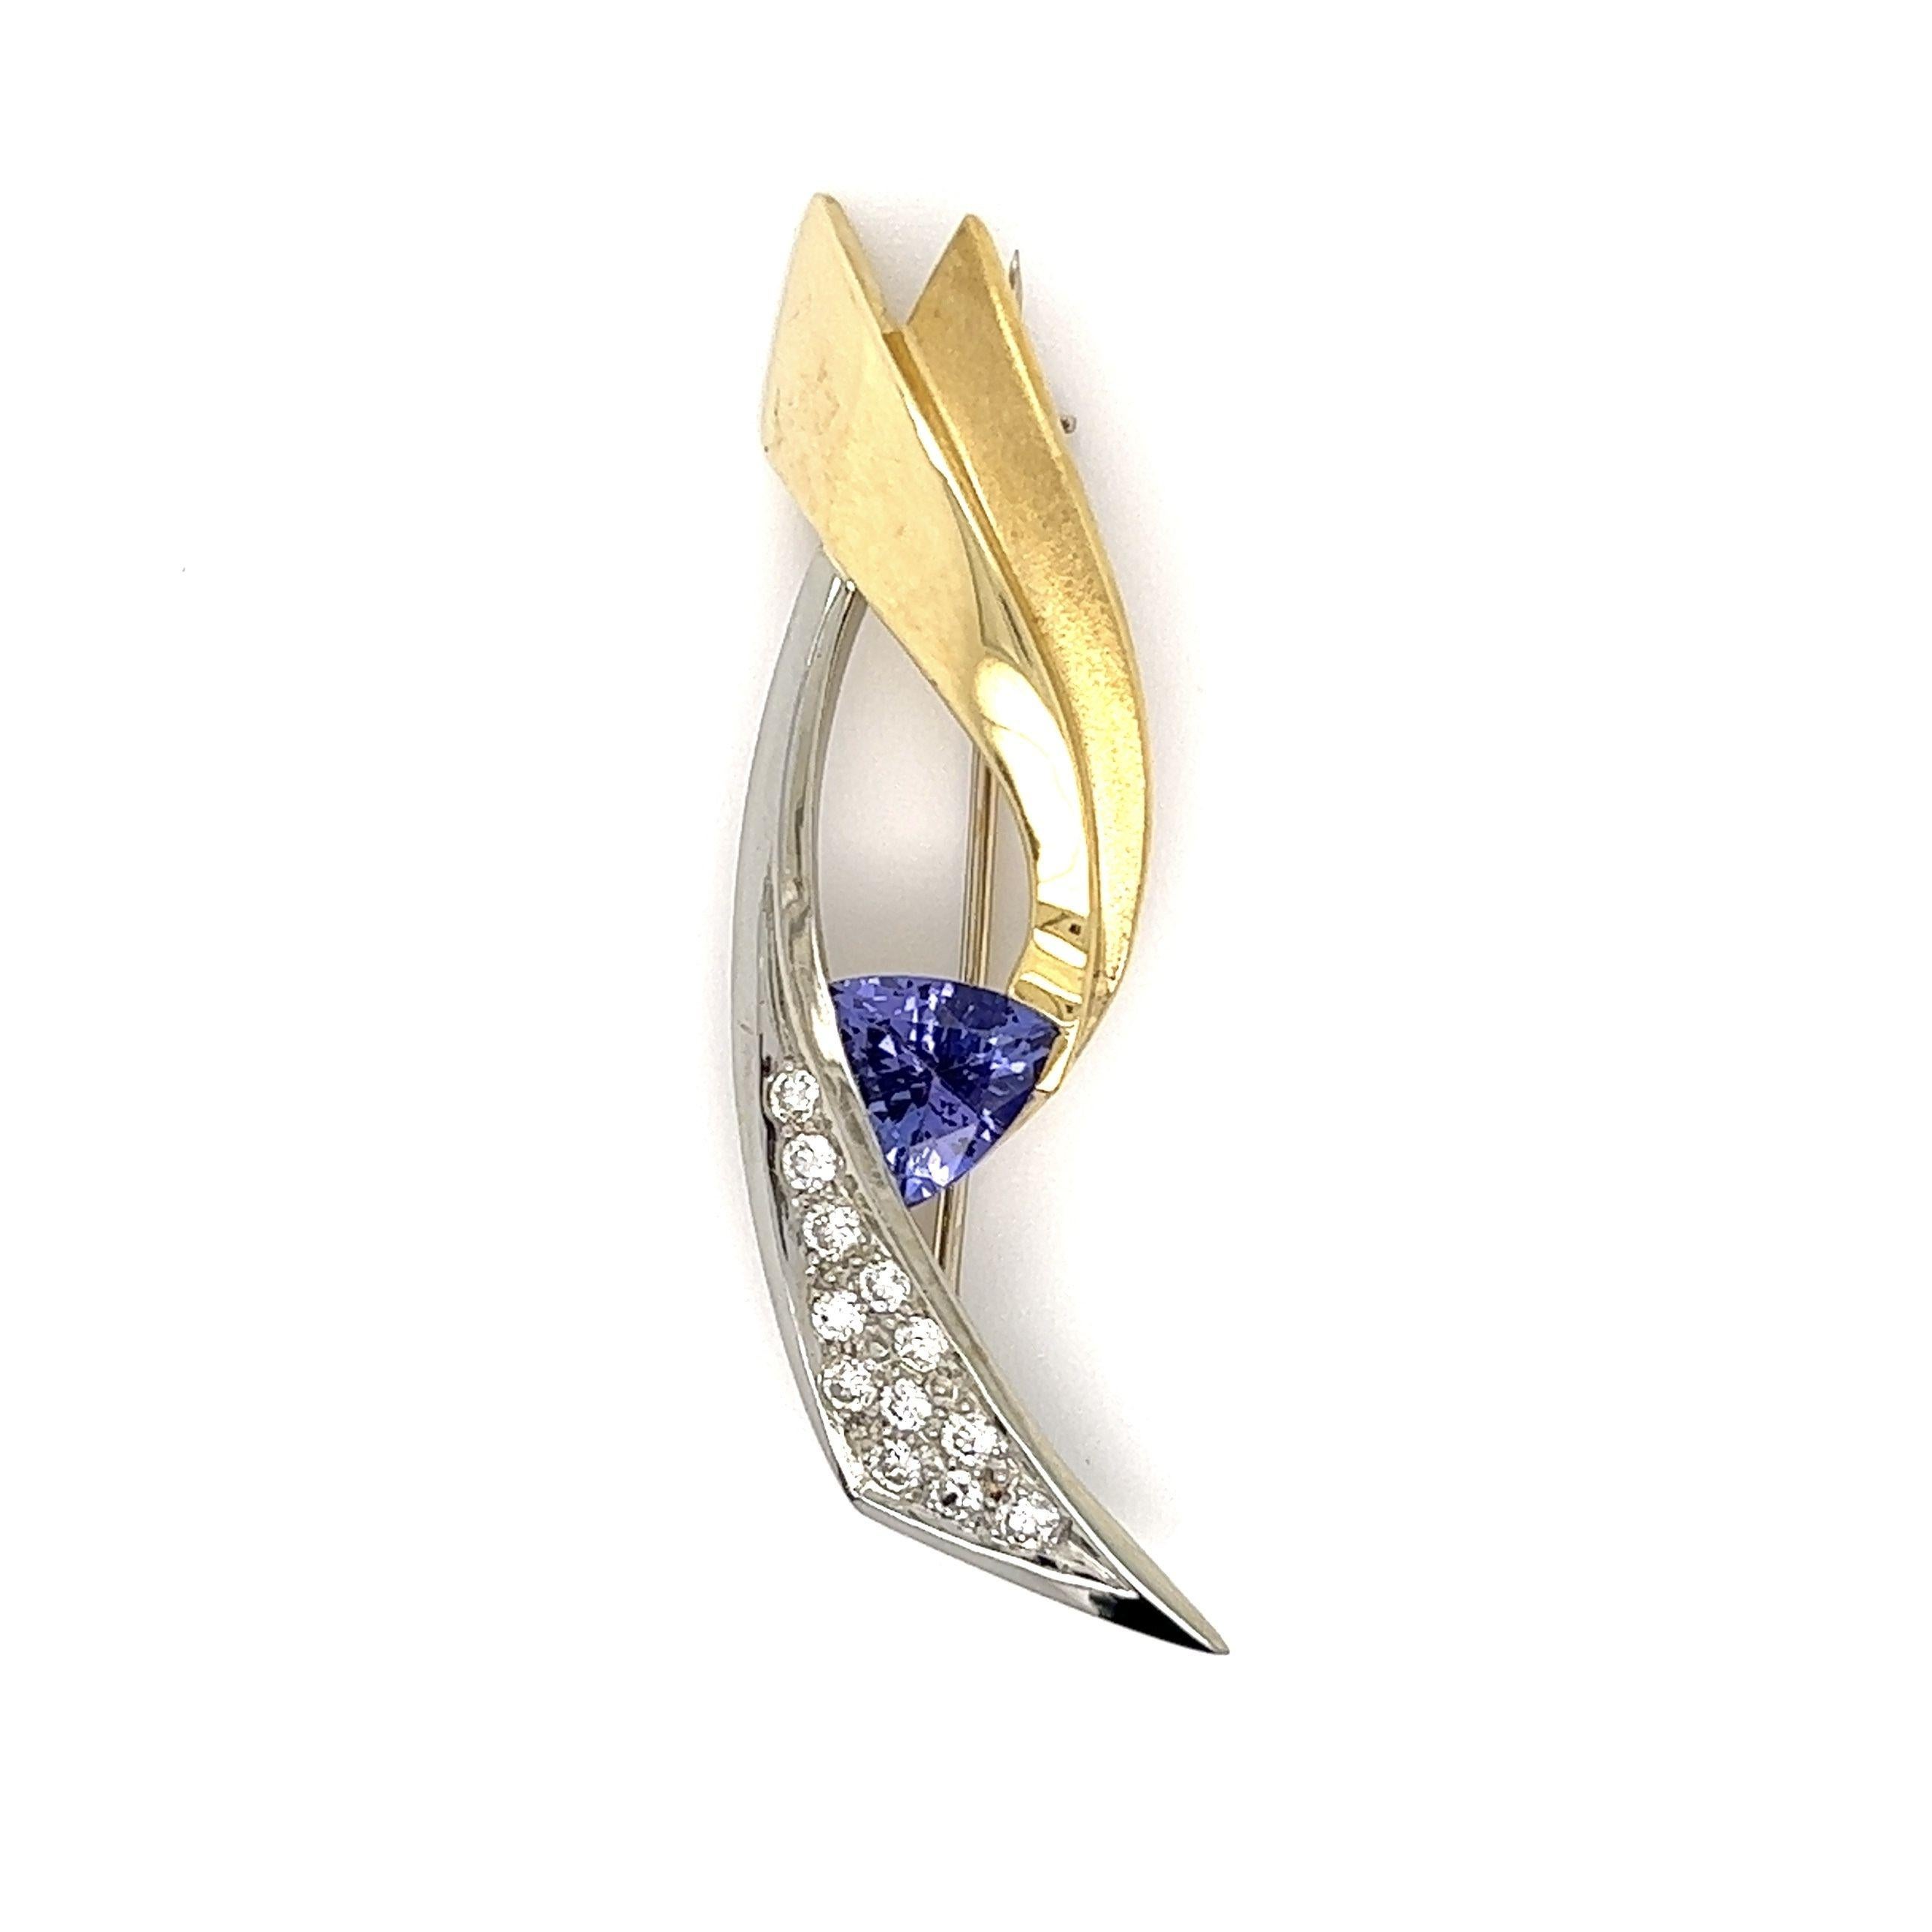 Awesome 1 Carat Trillion Tanzanite and 0.36tcw Diamond JOHN ATENCIO Brooch Pin. Beautifully Hand crafted in 2-Tone Yellow and White 18K Gold. Measuring approx. size 1.75” Long x 0.65” Wide. More Beautiful in real time! For that Special